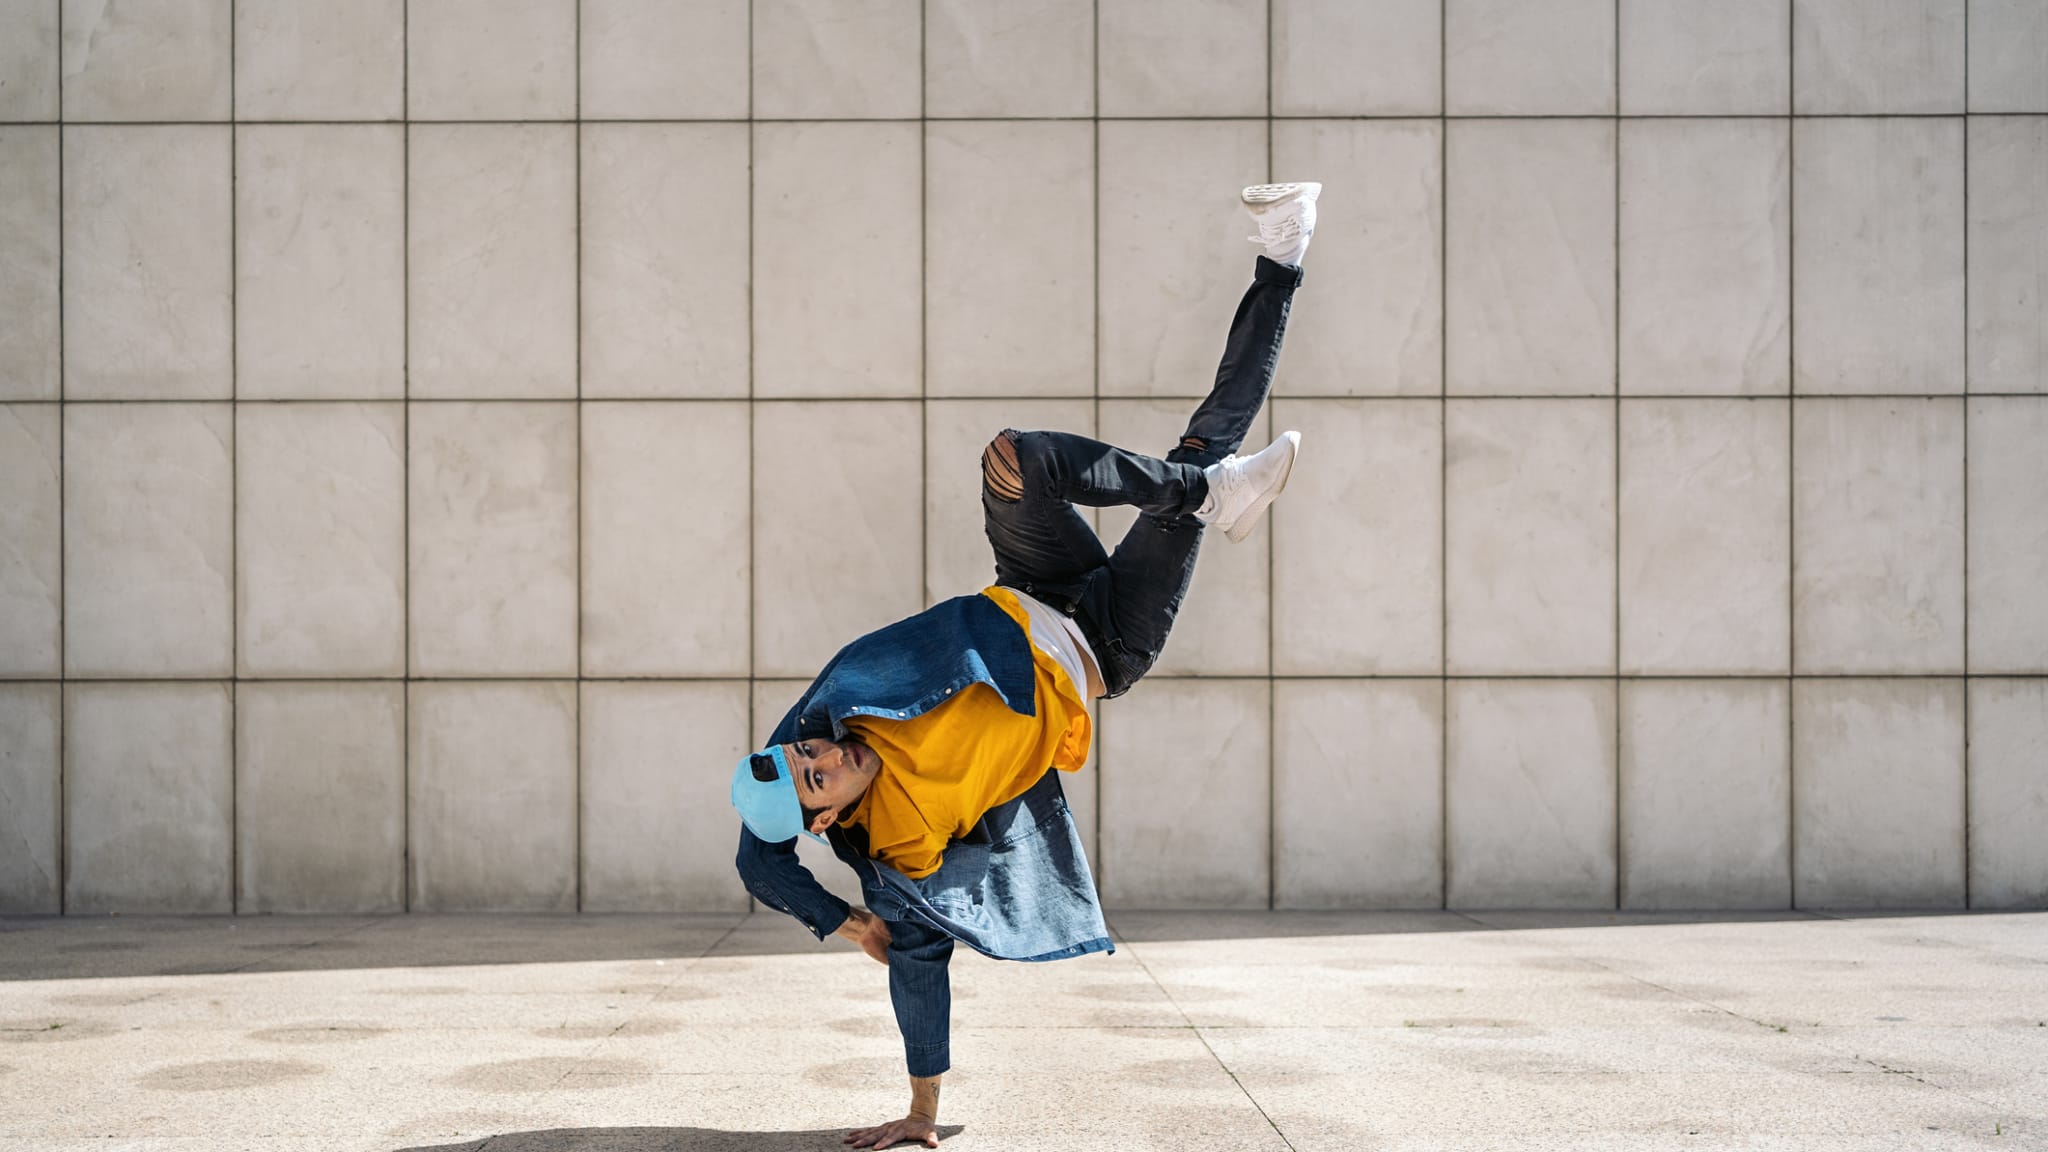 Breakdancer tanzt © santypan/iStock / Getty Images Plus via Getty Images